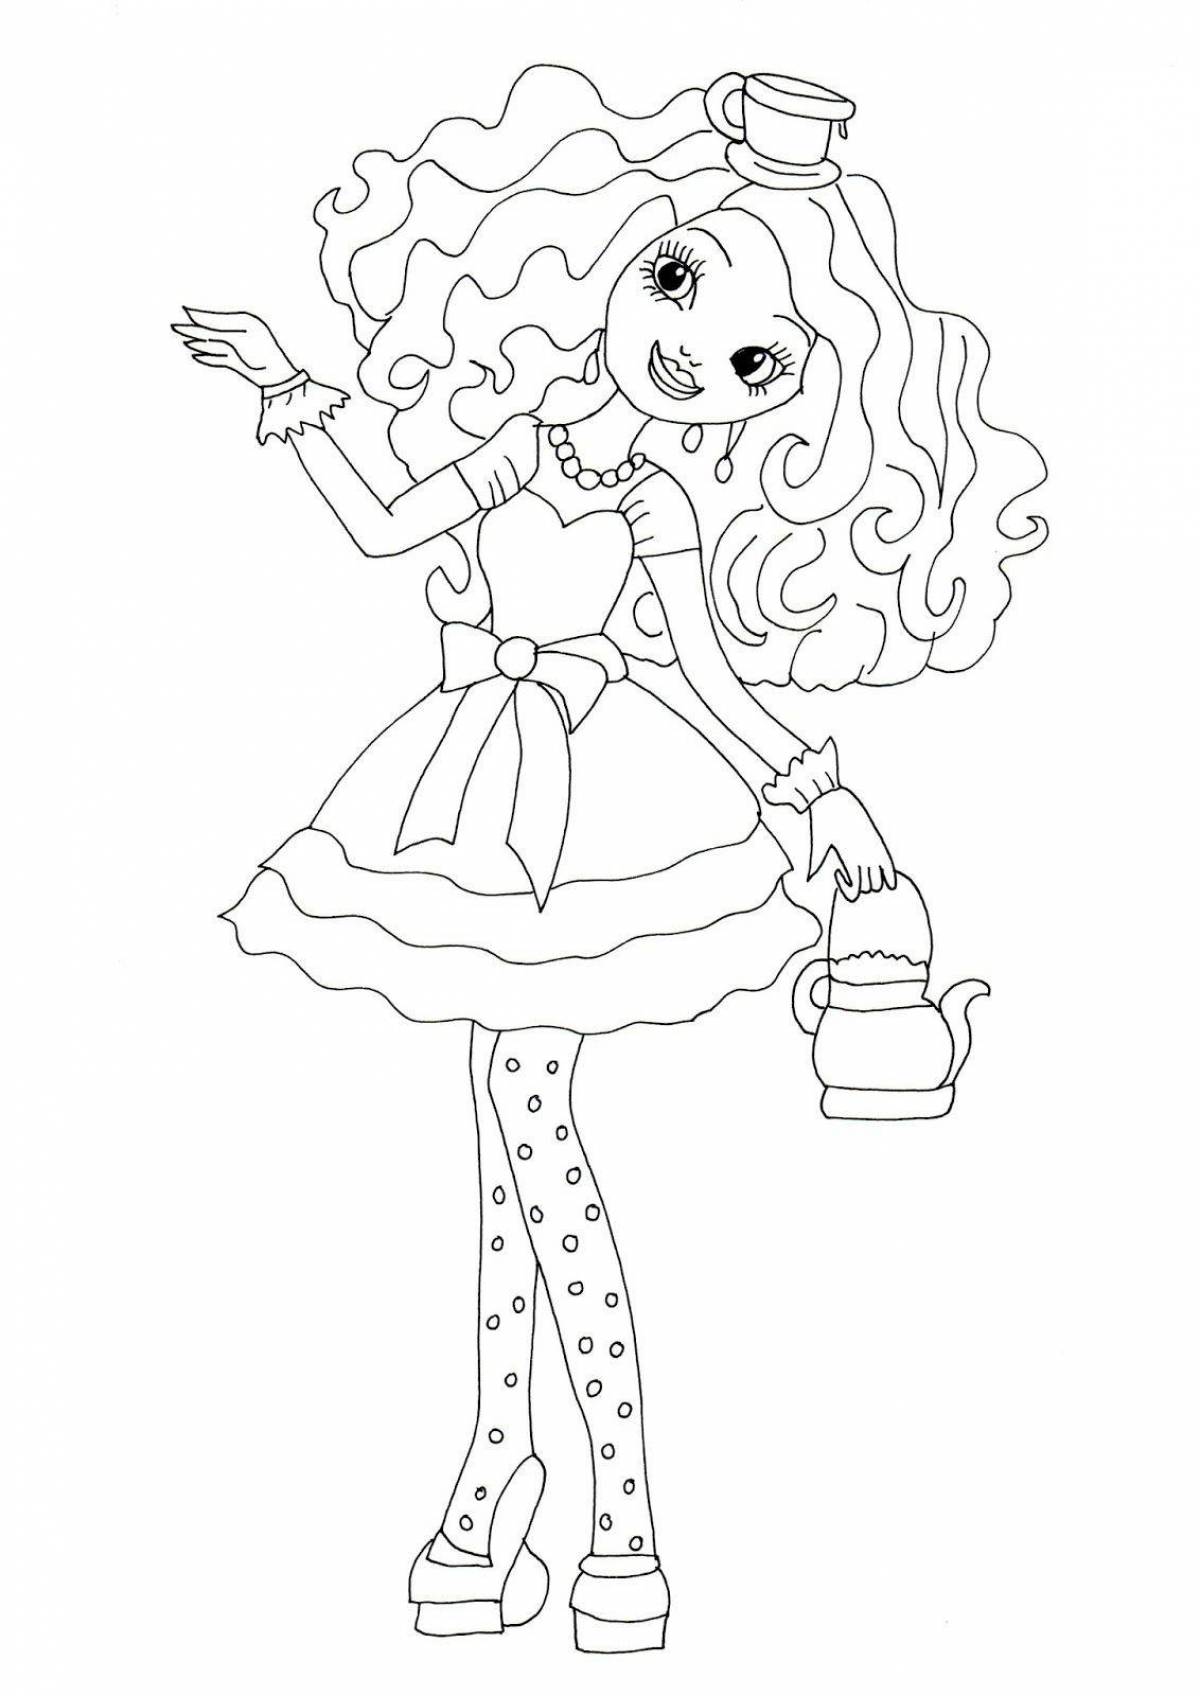 Color-frenzy coloring page boxy boo from poppy play time